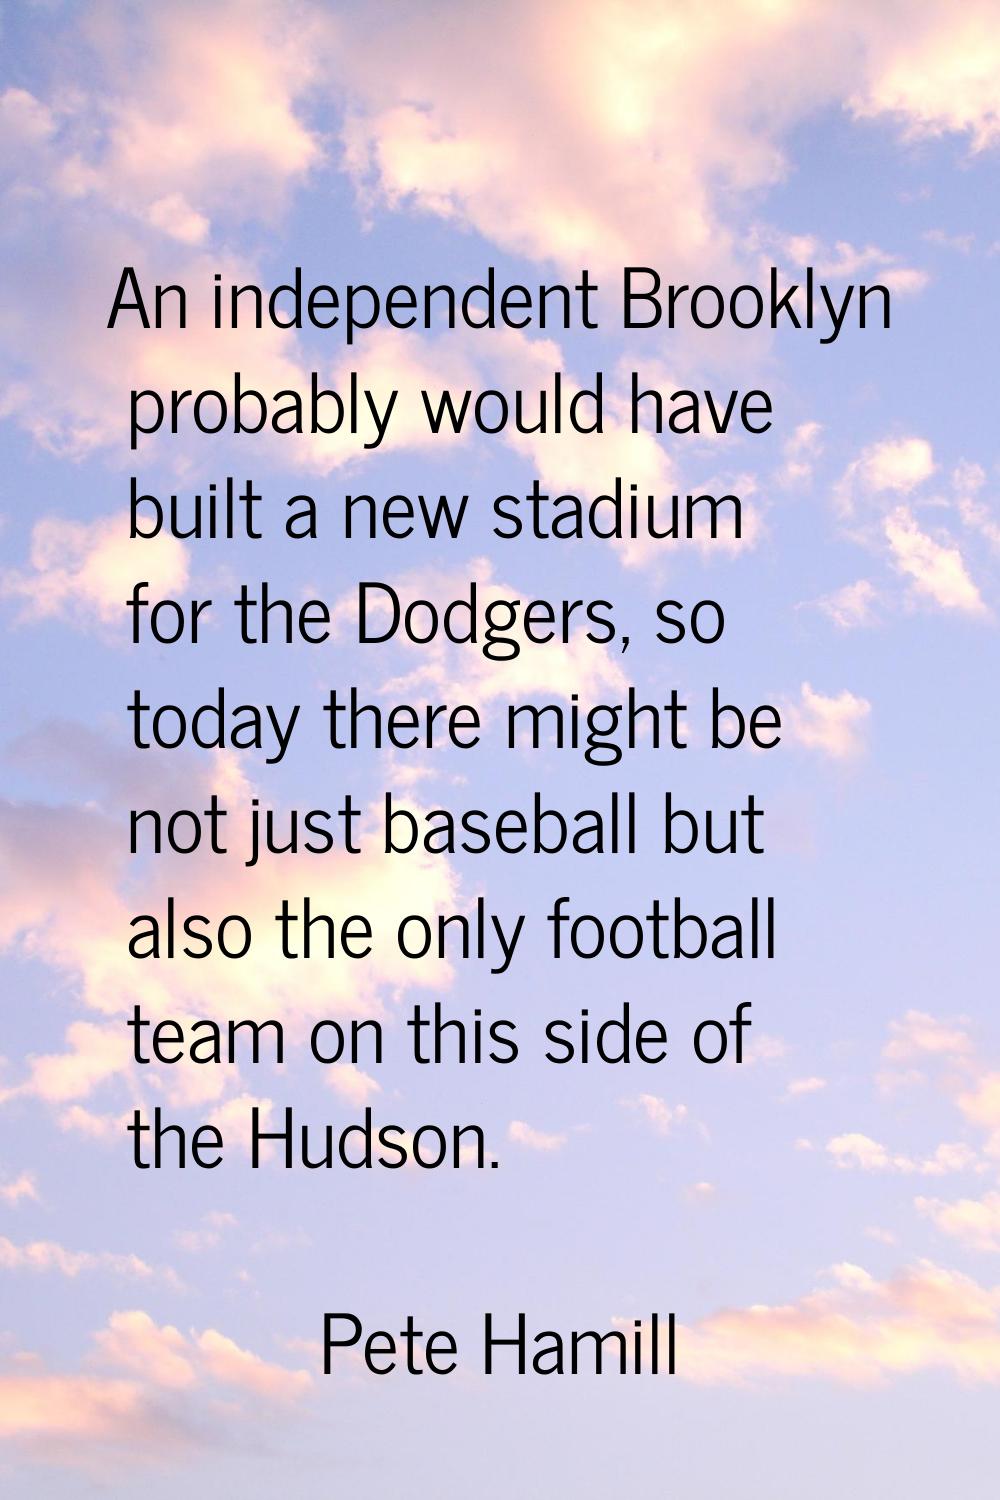 An independent Brooklyn probably would have built a new stadium for the Dodgers, so today there mig